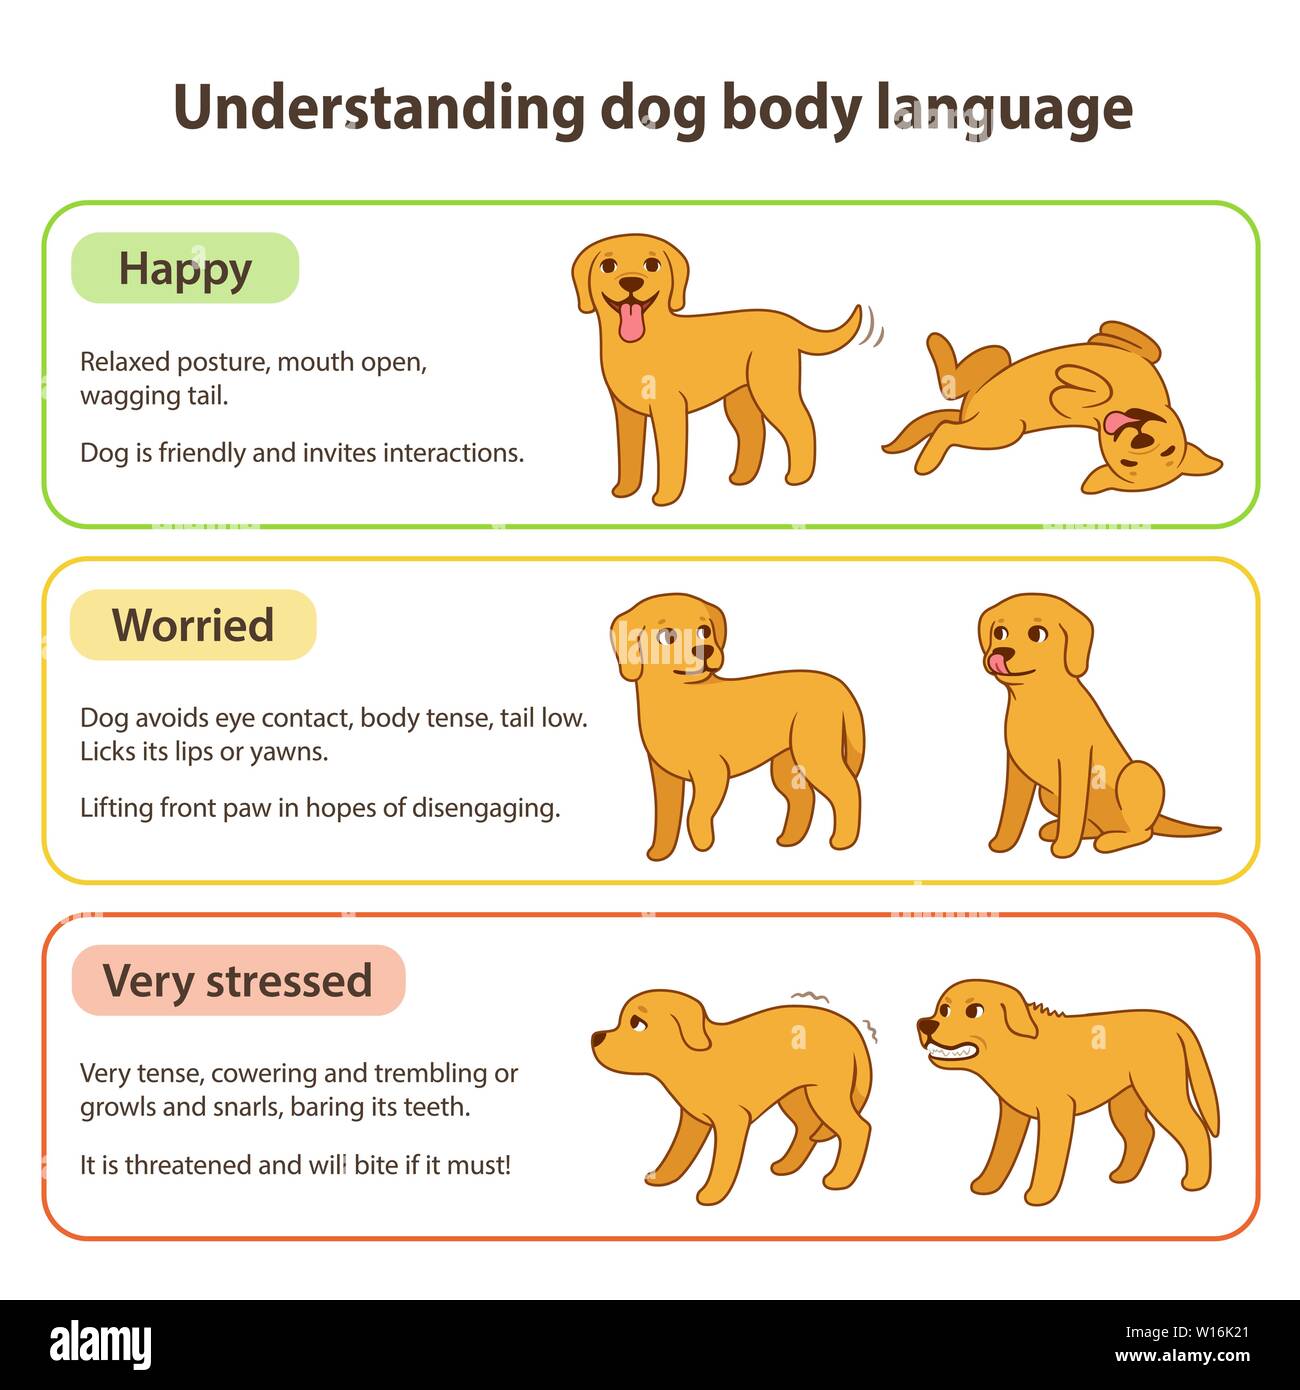 Dog body language infographic chart. Understanding dog poses that mean